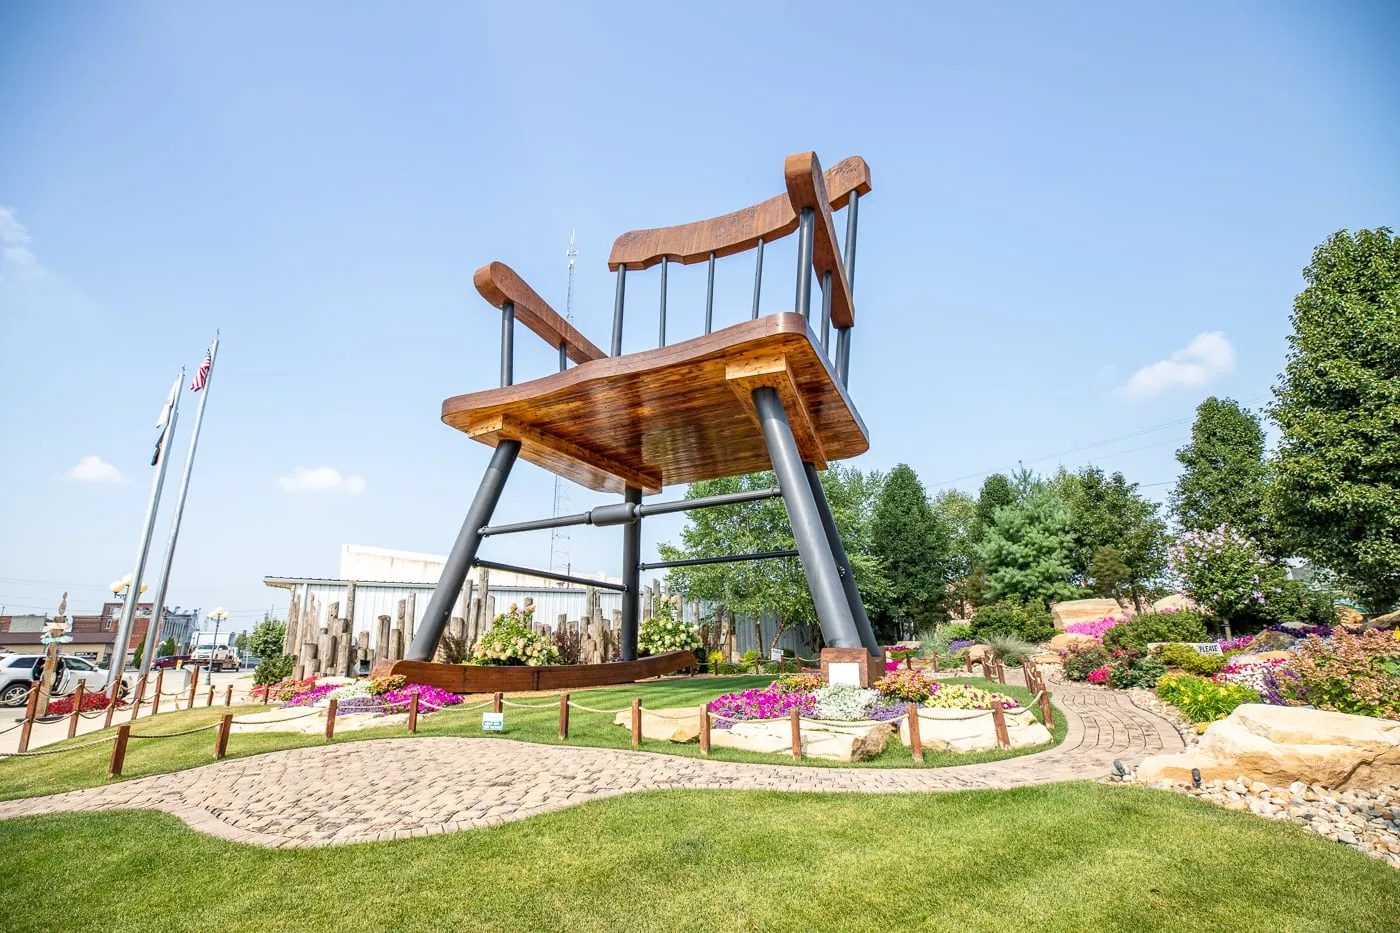 The 20 Best Illinois Roadside Attractions - World's Largest Rocking Chair in Casey, Illinois roadside attraction